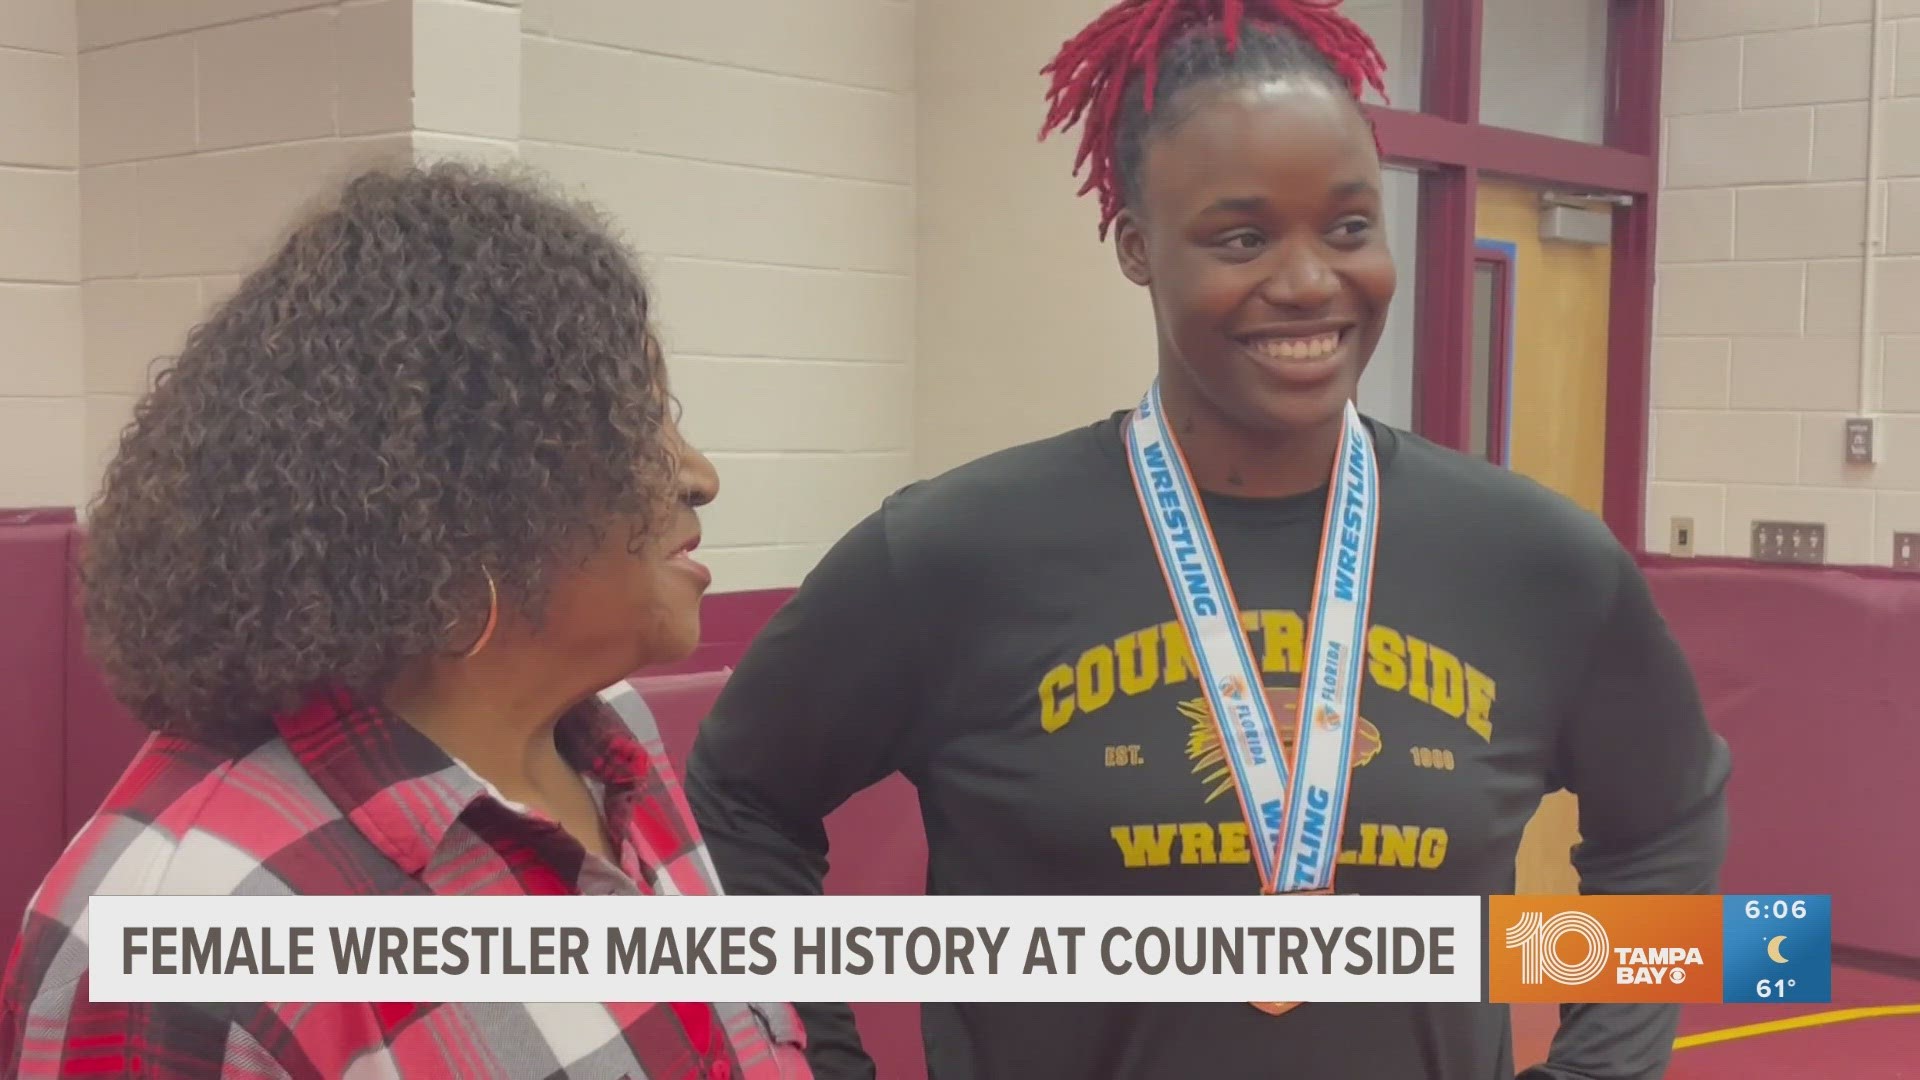 Cerenity Whiting, a junior at Countryside High School, won the state championship and will go on to compete for the national title in Virginia.